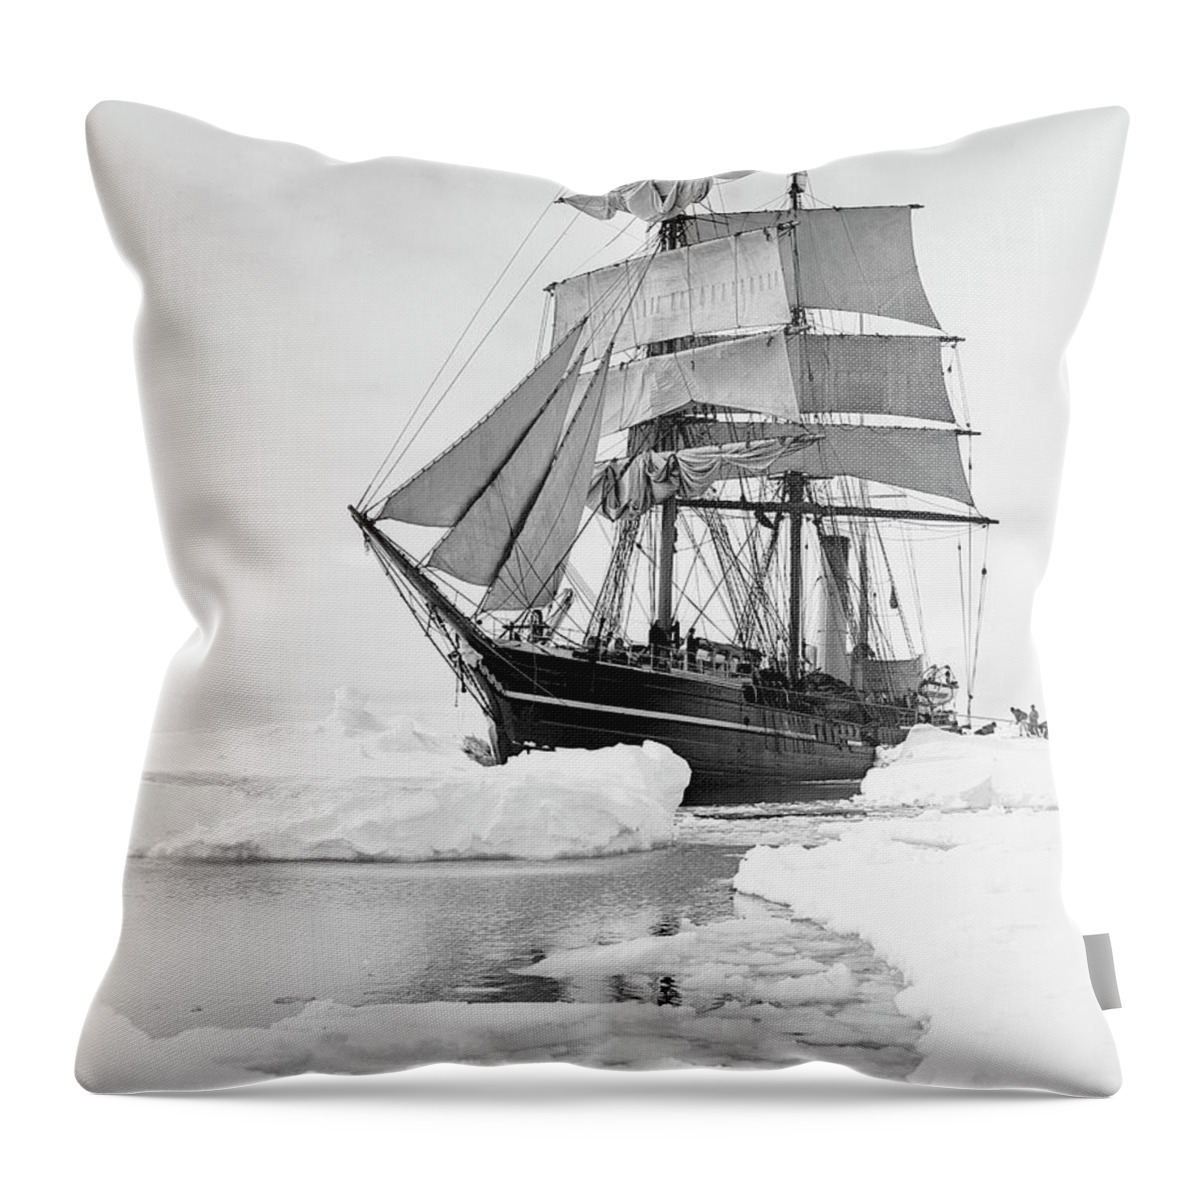 1900s Throw Pillow featuring the photograph Terra Nova in Antarctic pack ice, 1910 by Scott Polar Research Institute